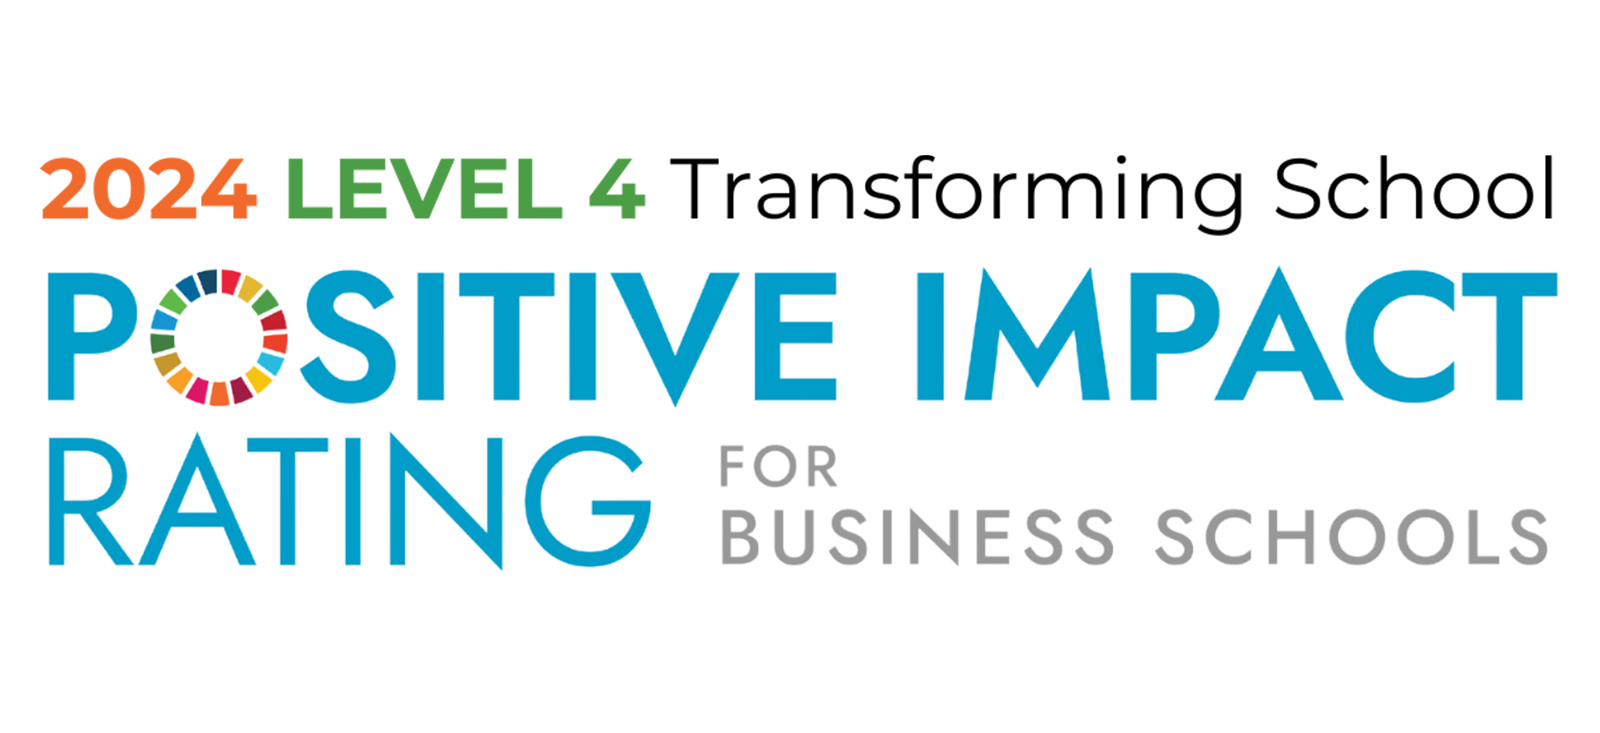 Drexel LeBow achieved a Level 4 rating by the 2024 Positive Impact Rating